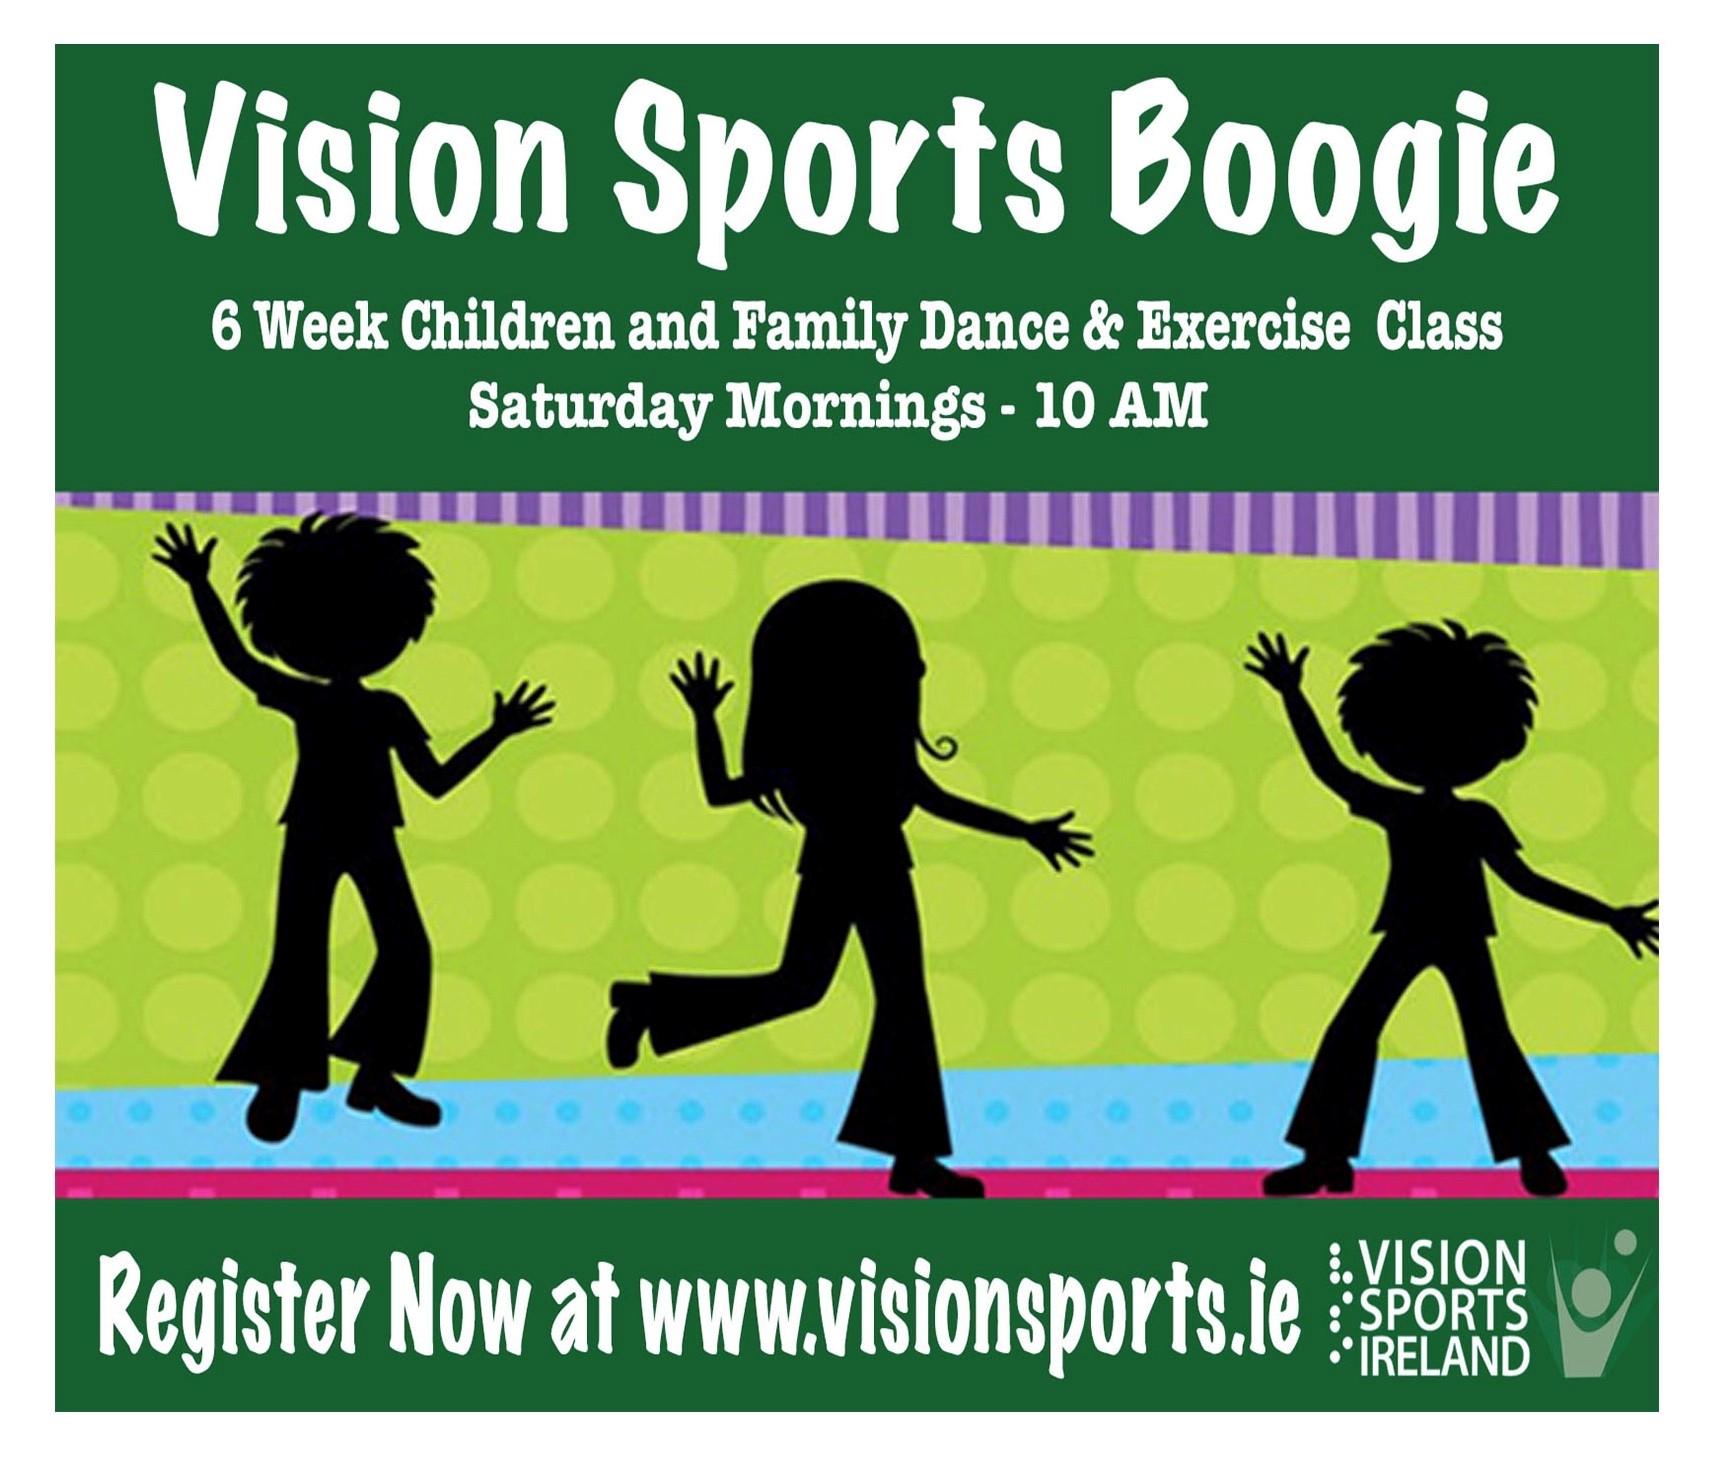 Shadow of three people dancing. Vision Sports Boogie, 6 week children and family dance and exercise programme. Vision Sports Ireland logo